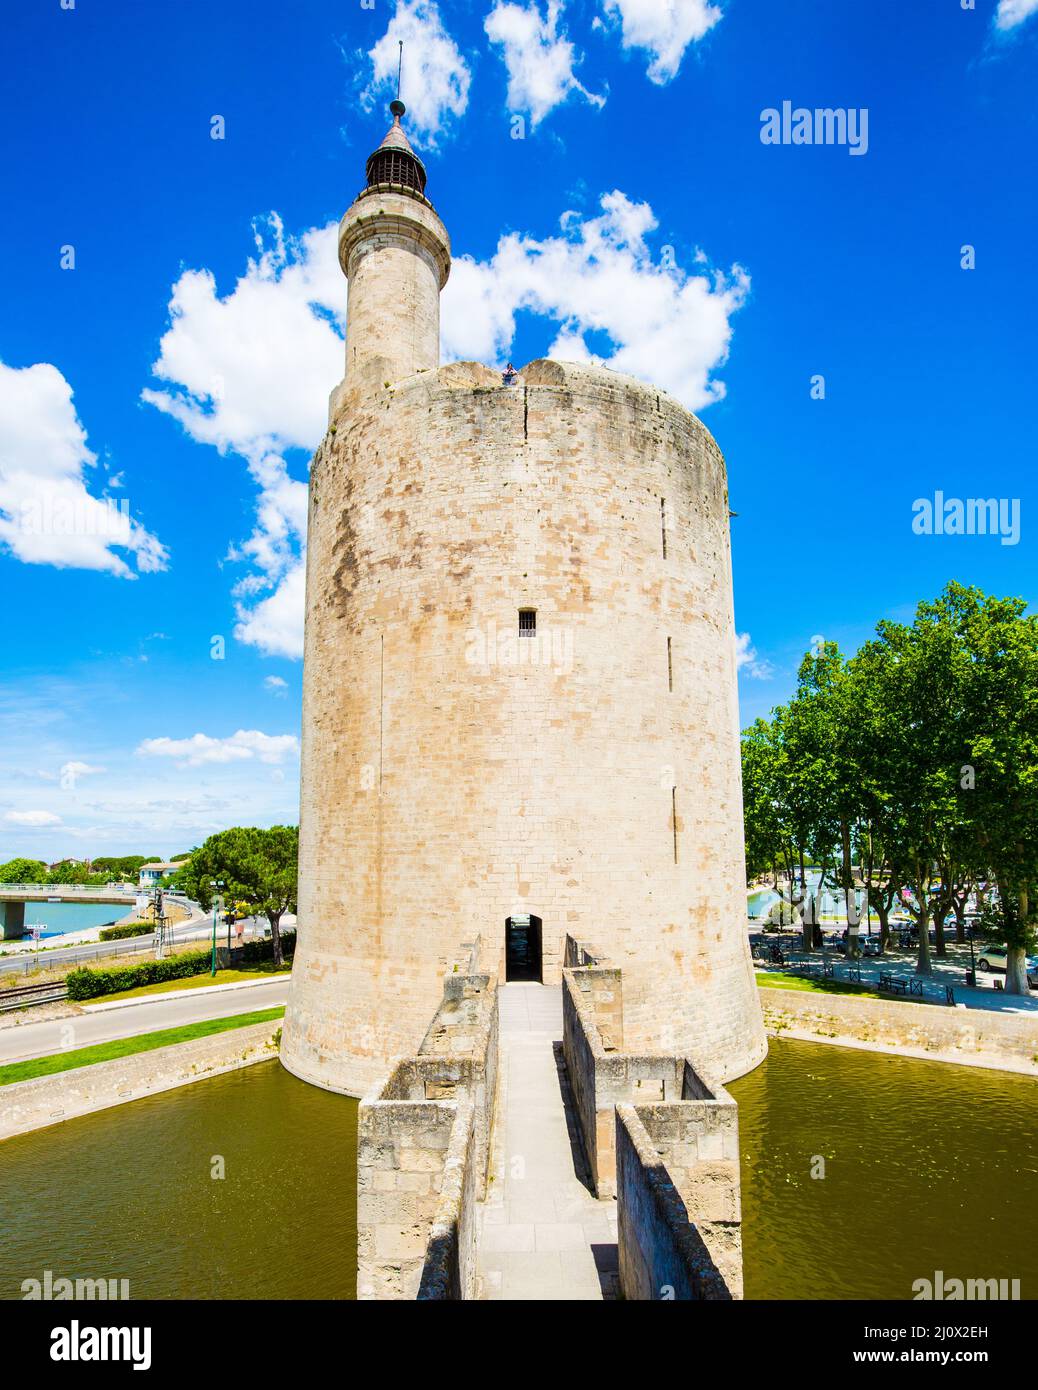 The tower of Constance and atique walls Stock Photo